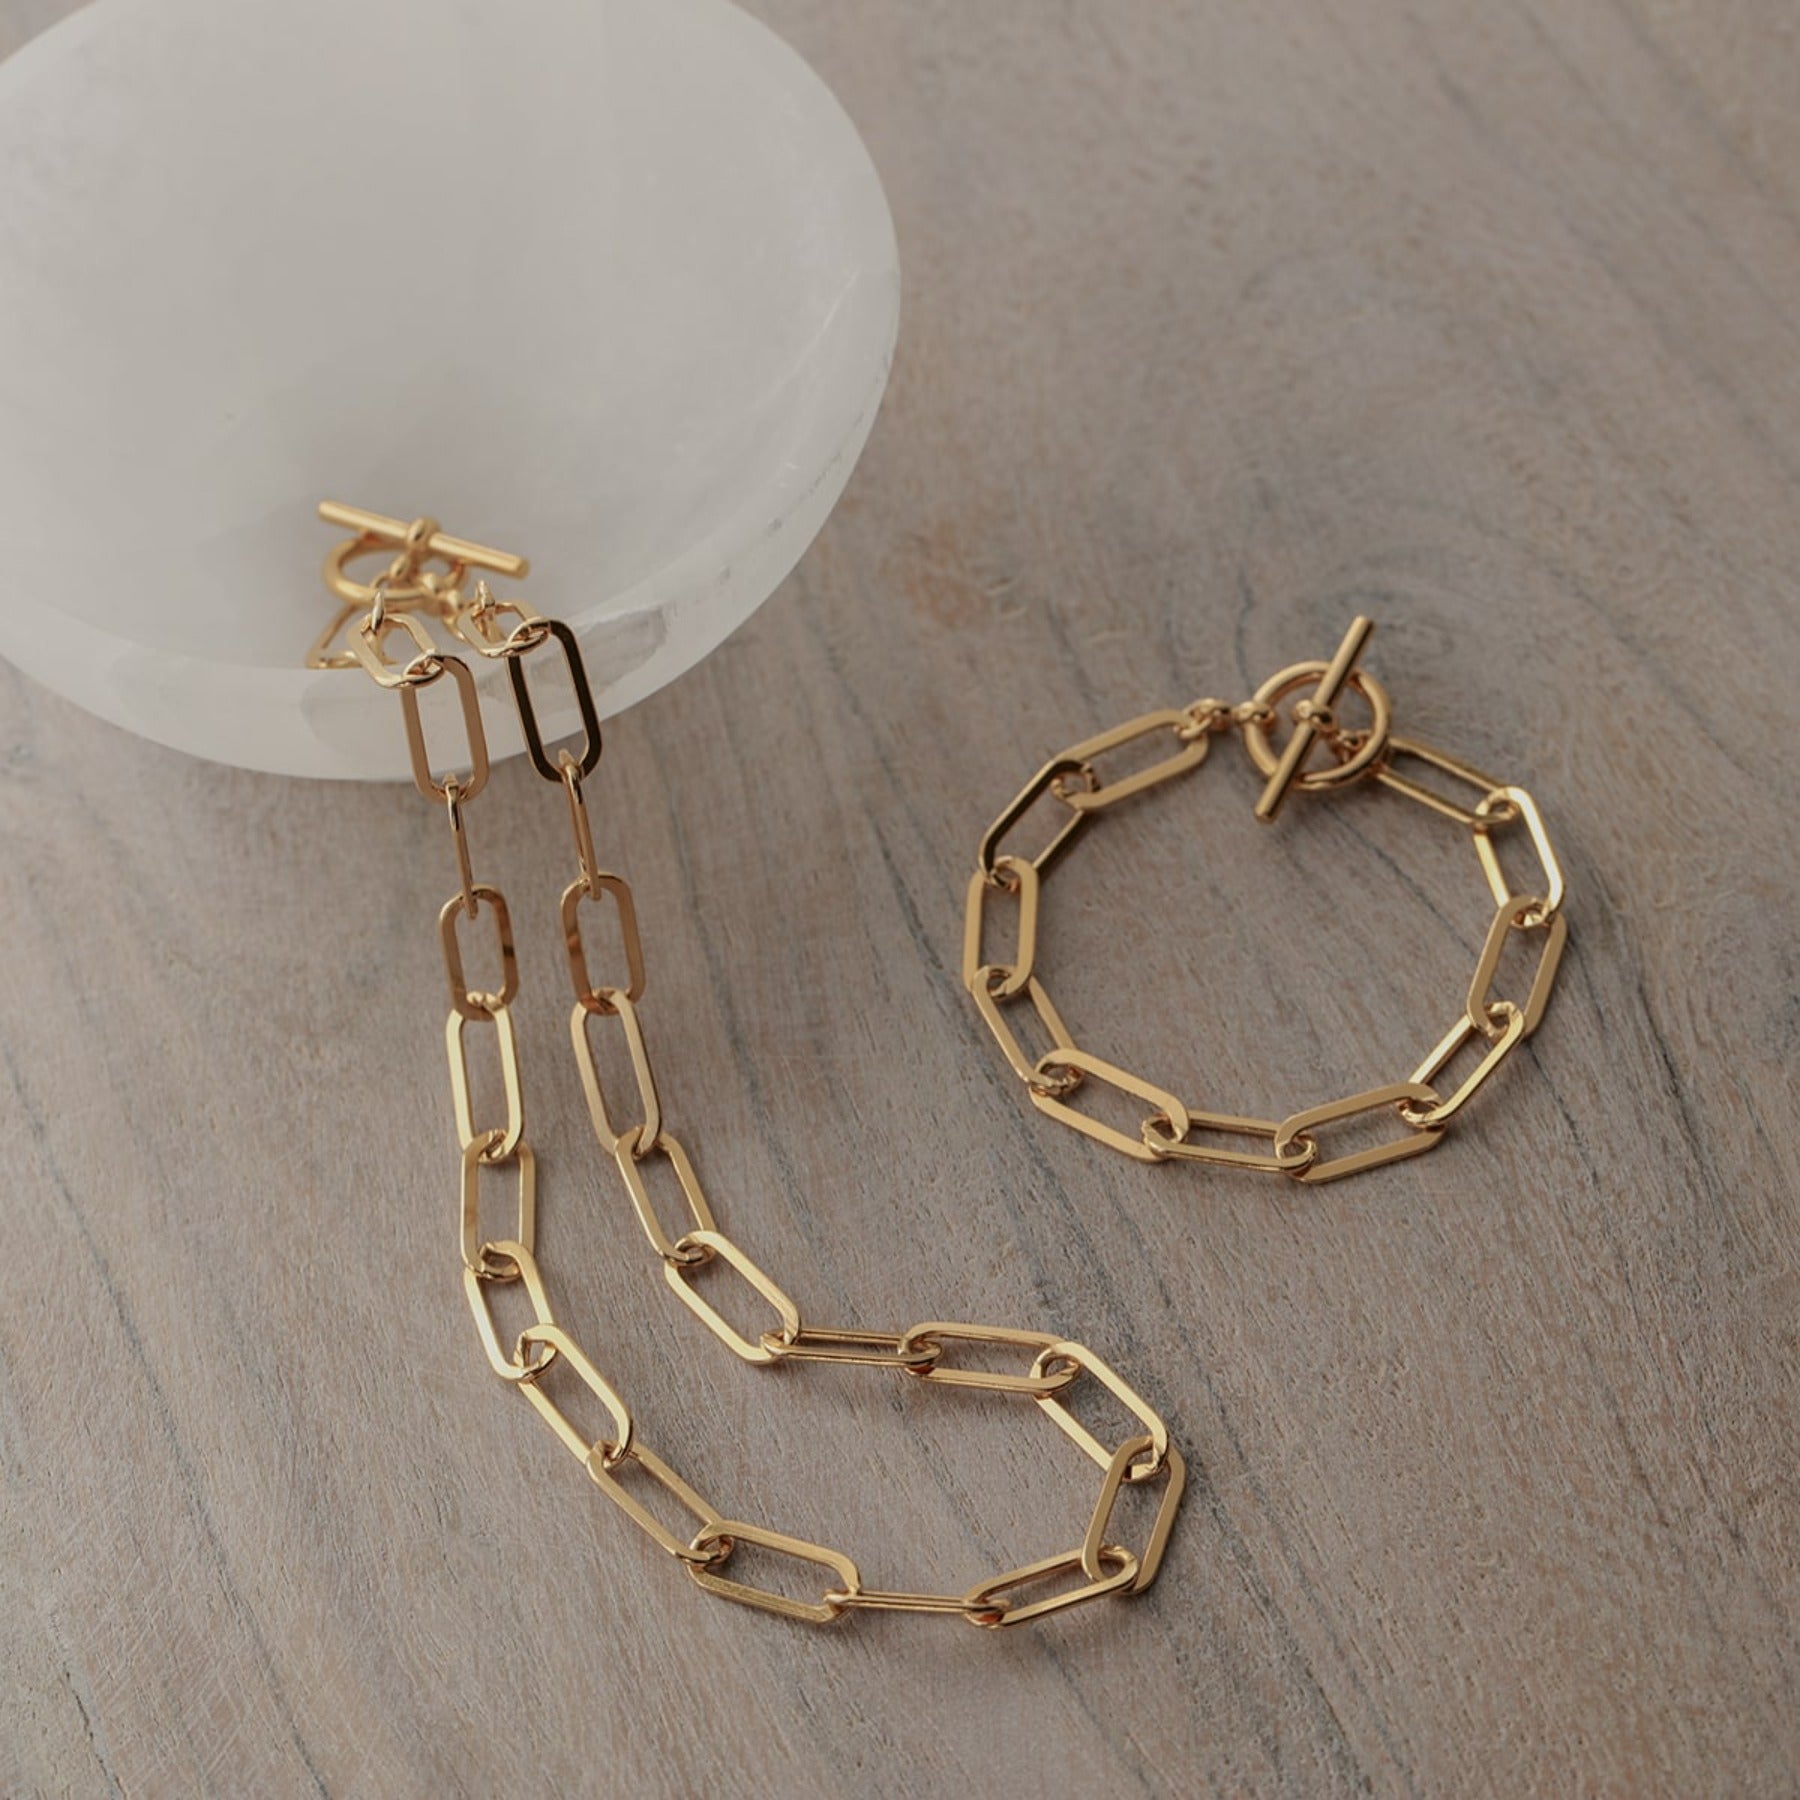 Elongated flattened paperclip chain bracelet with a toggle clasp in 18k gold vermeil.